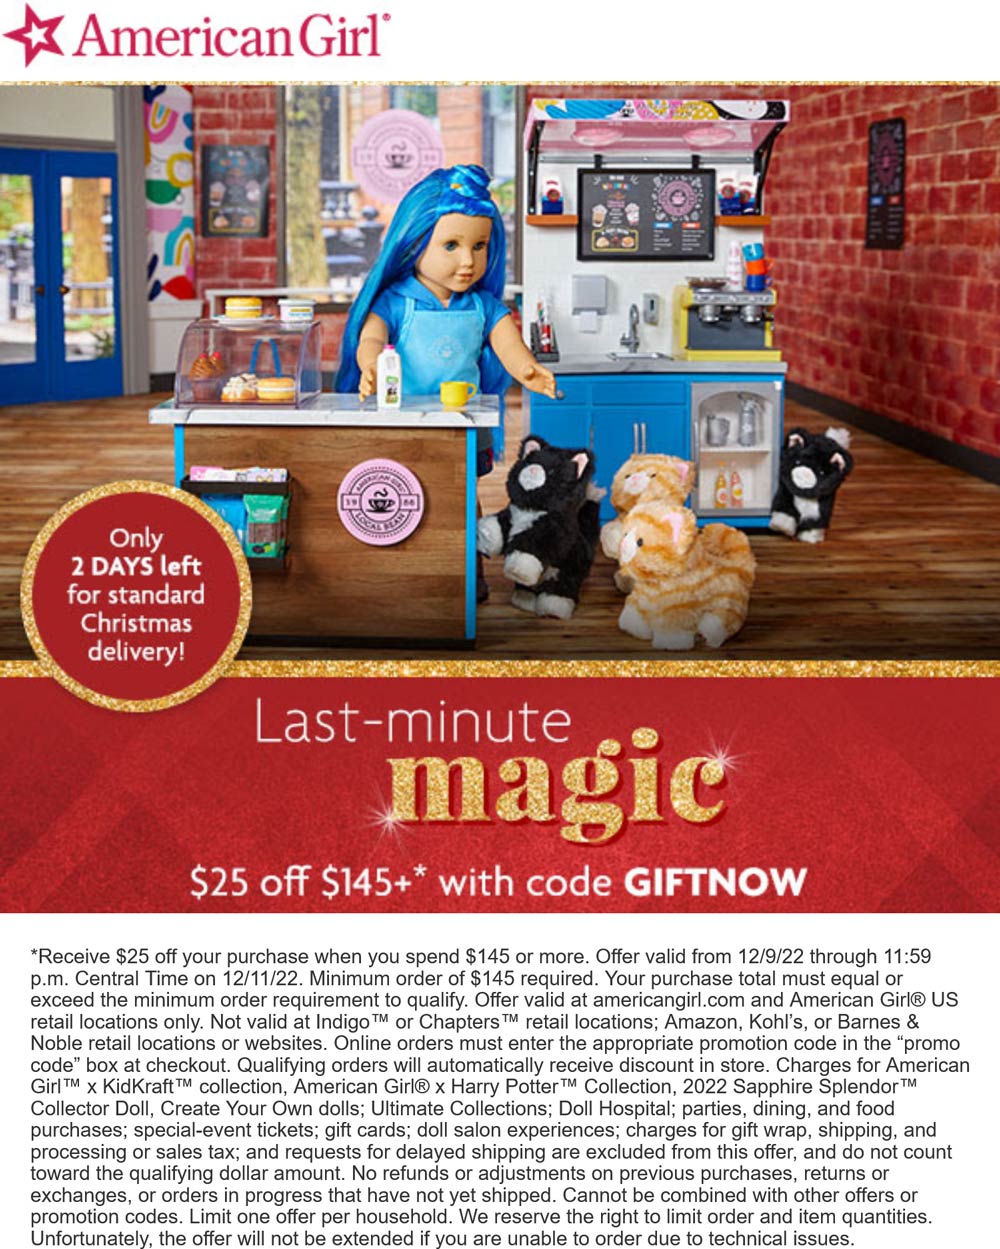 American Girl coupons & promo code for [January 2023]